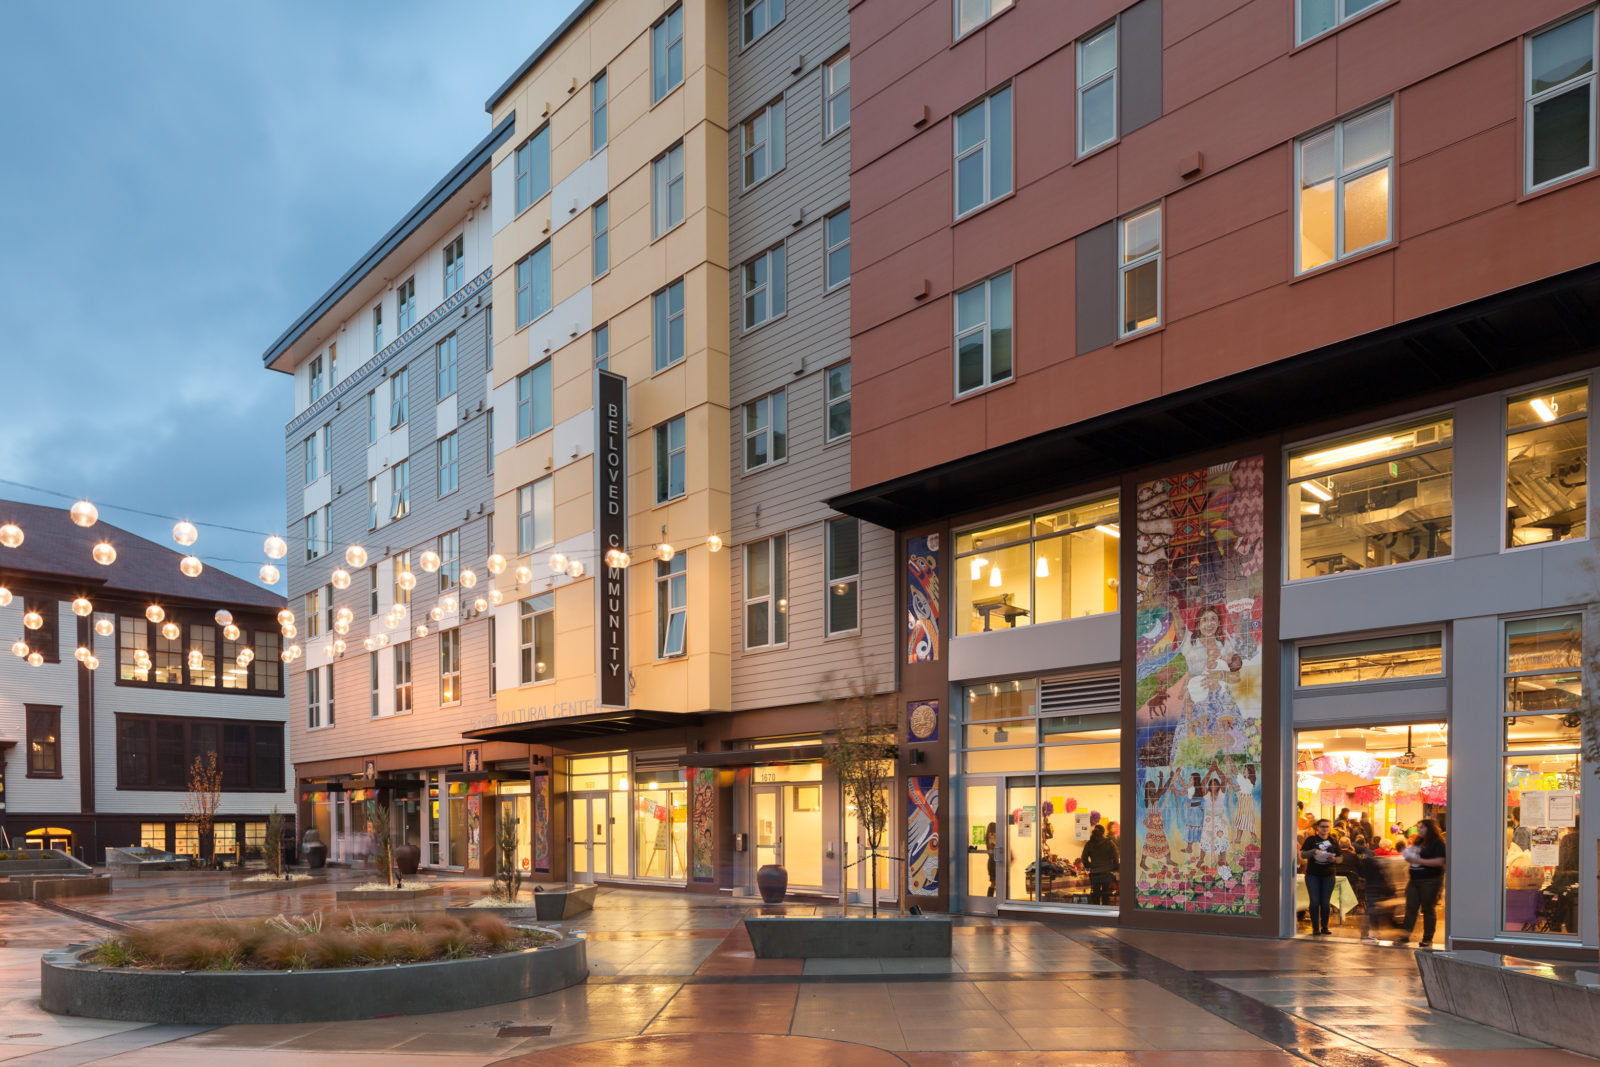 Photo of Plaza Roberto Maestas in Seattle’s Beacon Hill neighborhood is courtesy of William Wright Photography and SMR Architects